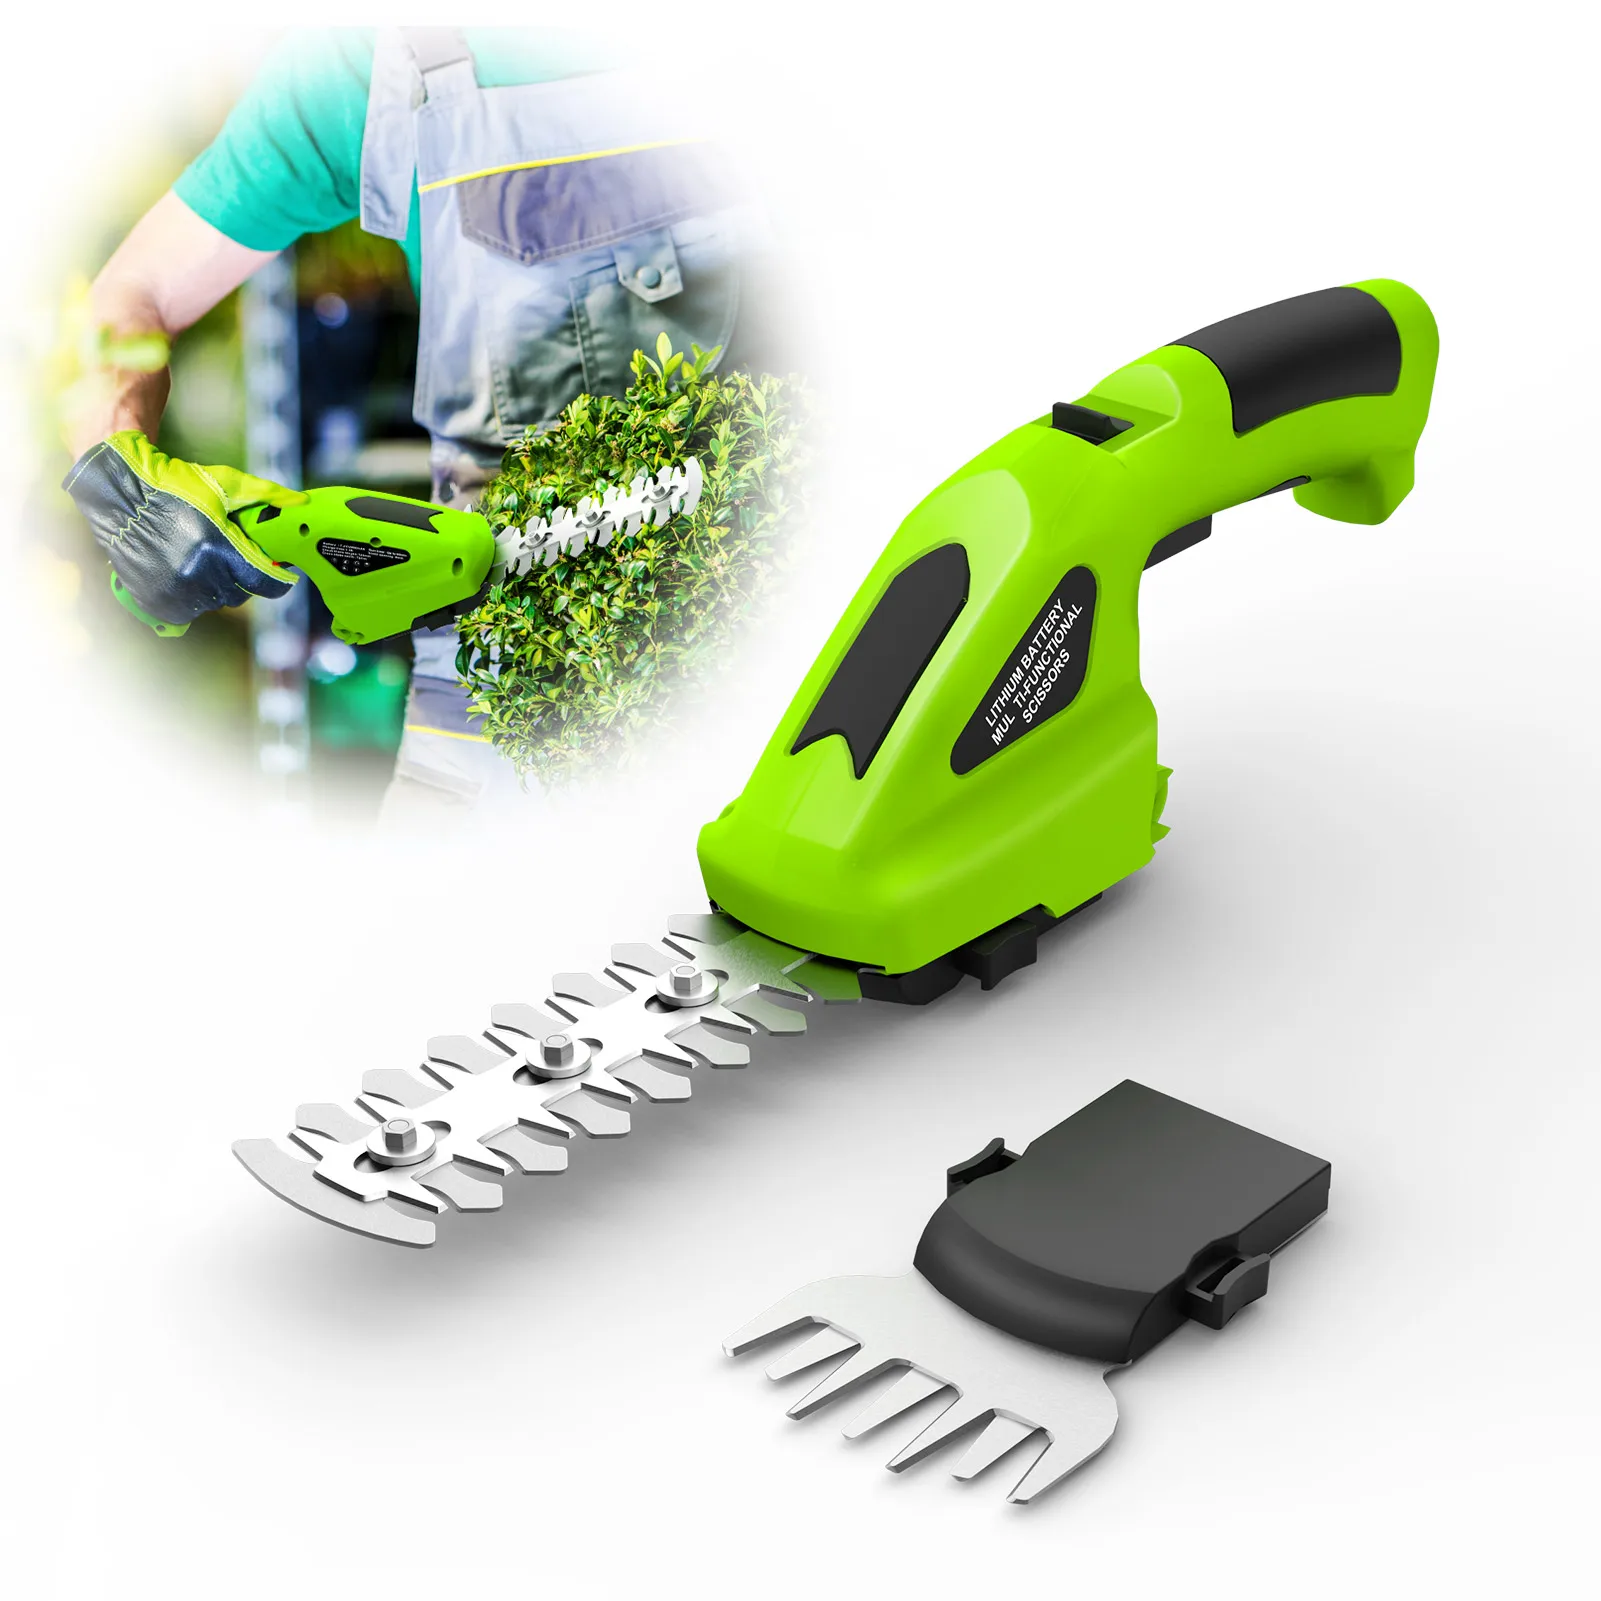 https://ae01.alicdn.com/kf/S27cf4674dbd0408893642fcde7ff449et/Cordless-Hedge-Trimmer-Electric-Hand-Held-Grass-Shear-Shrubbery-Clipper-7-2V-Electric-Grass-Cutter-with.jpg